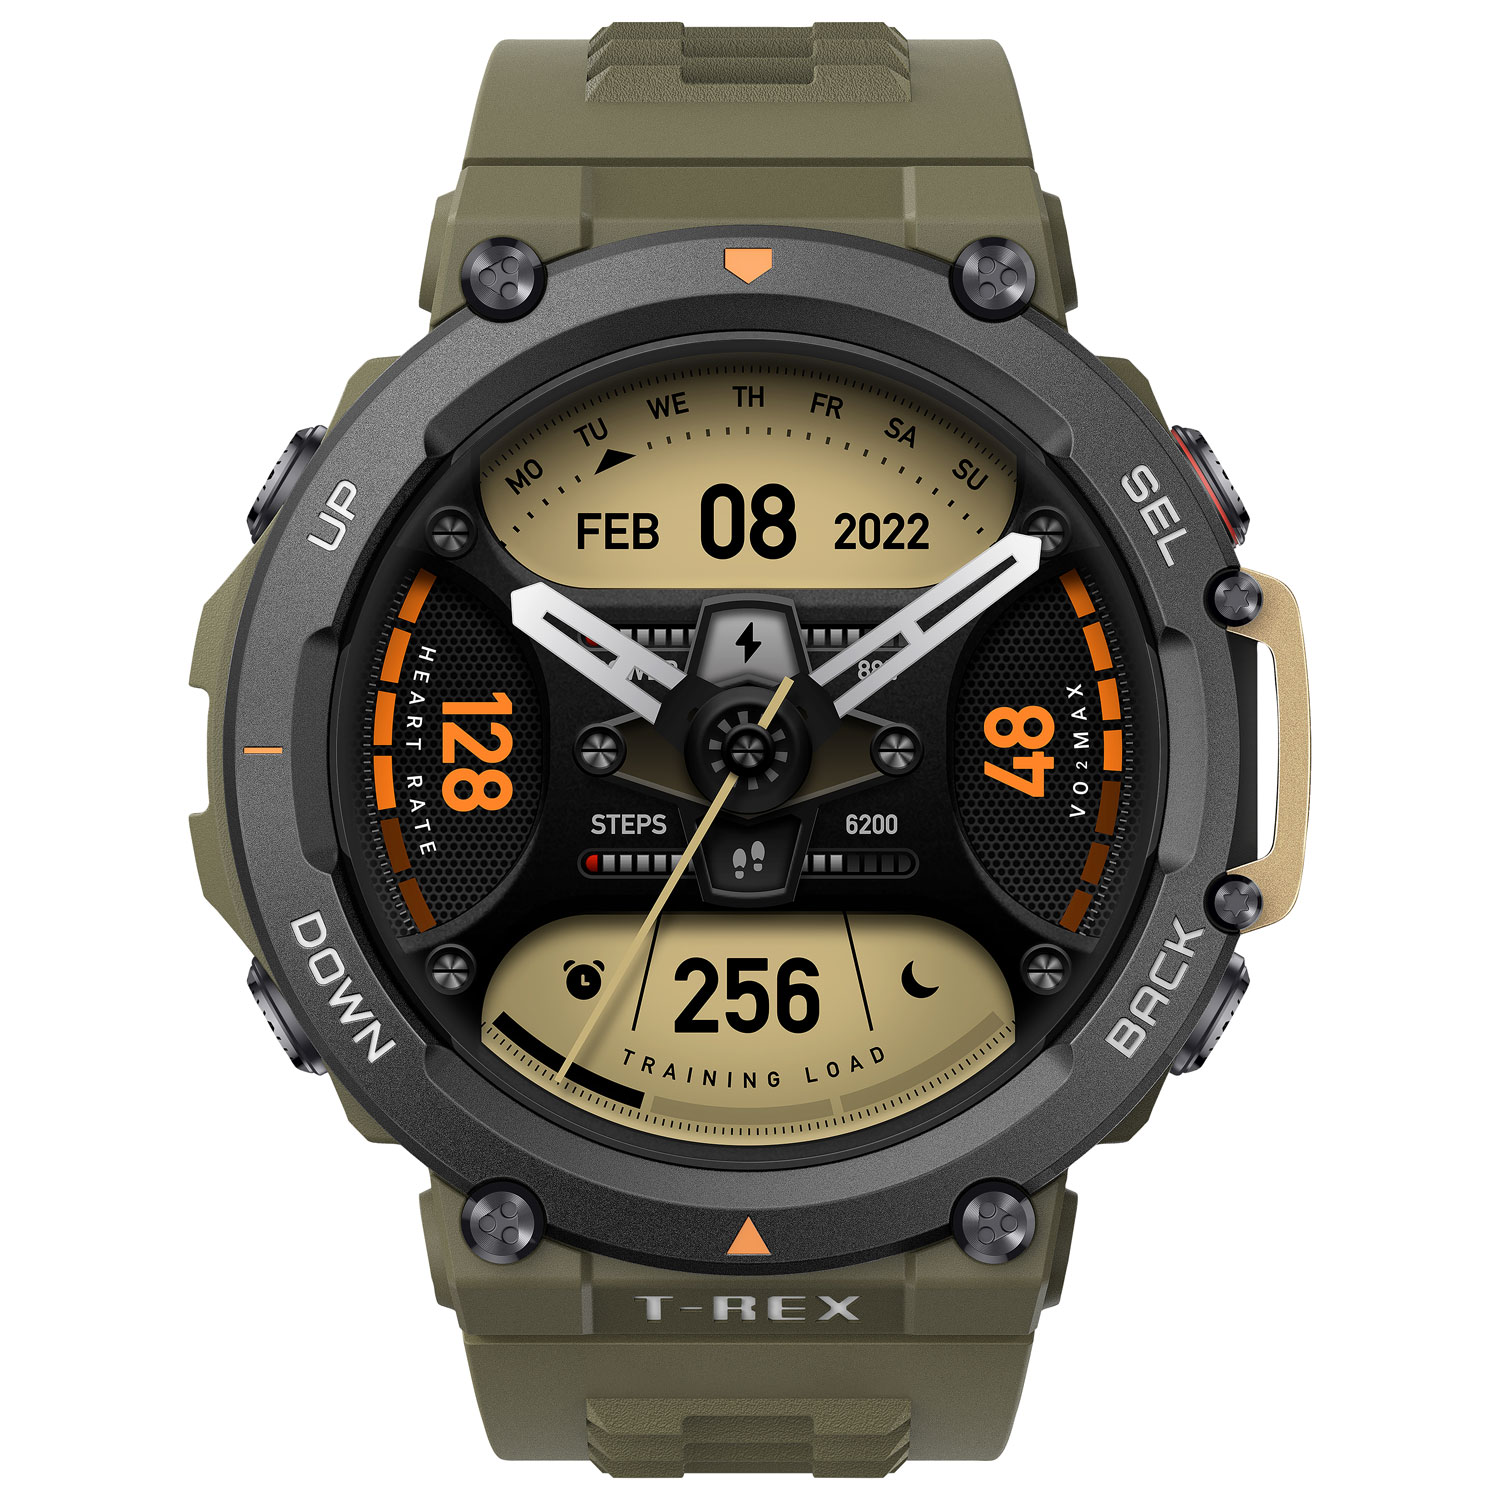 Amazfit T-Rex 2 Smartwatch with Heart Rate Monitor - Green